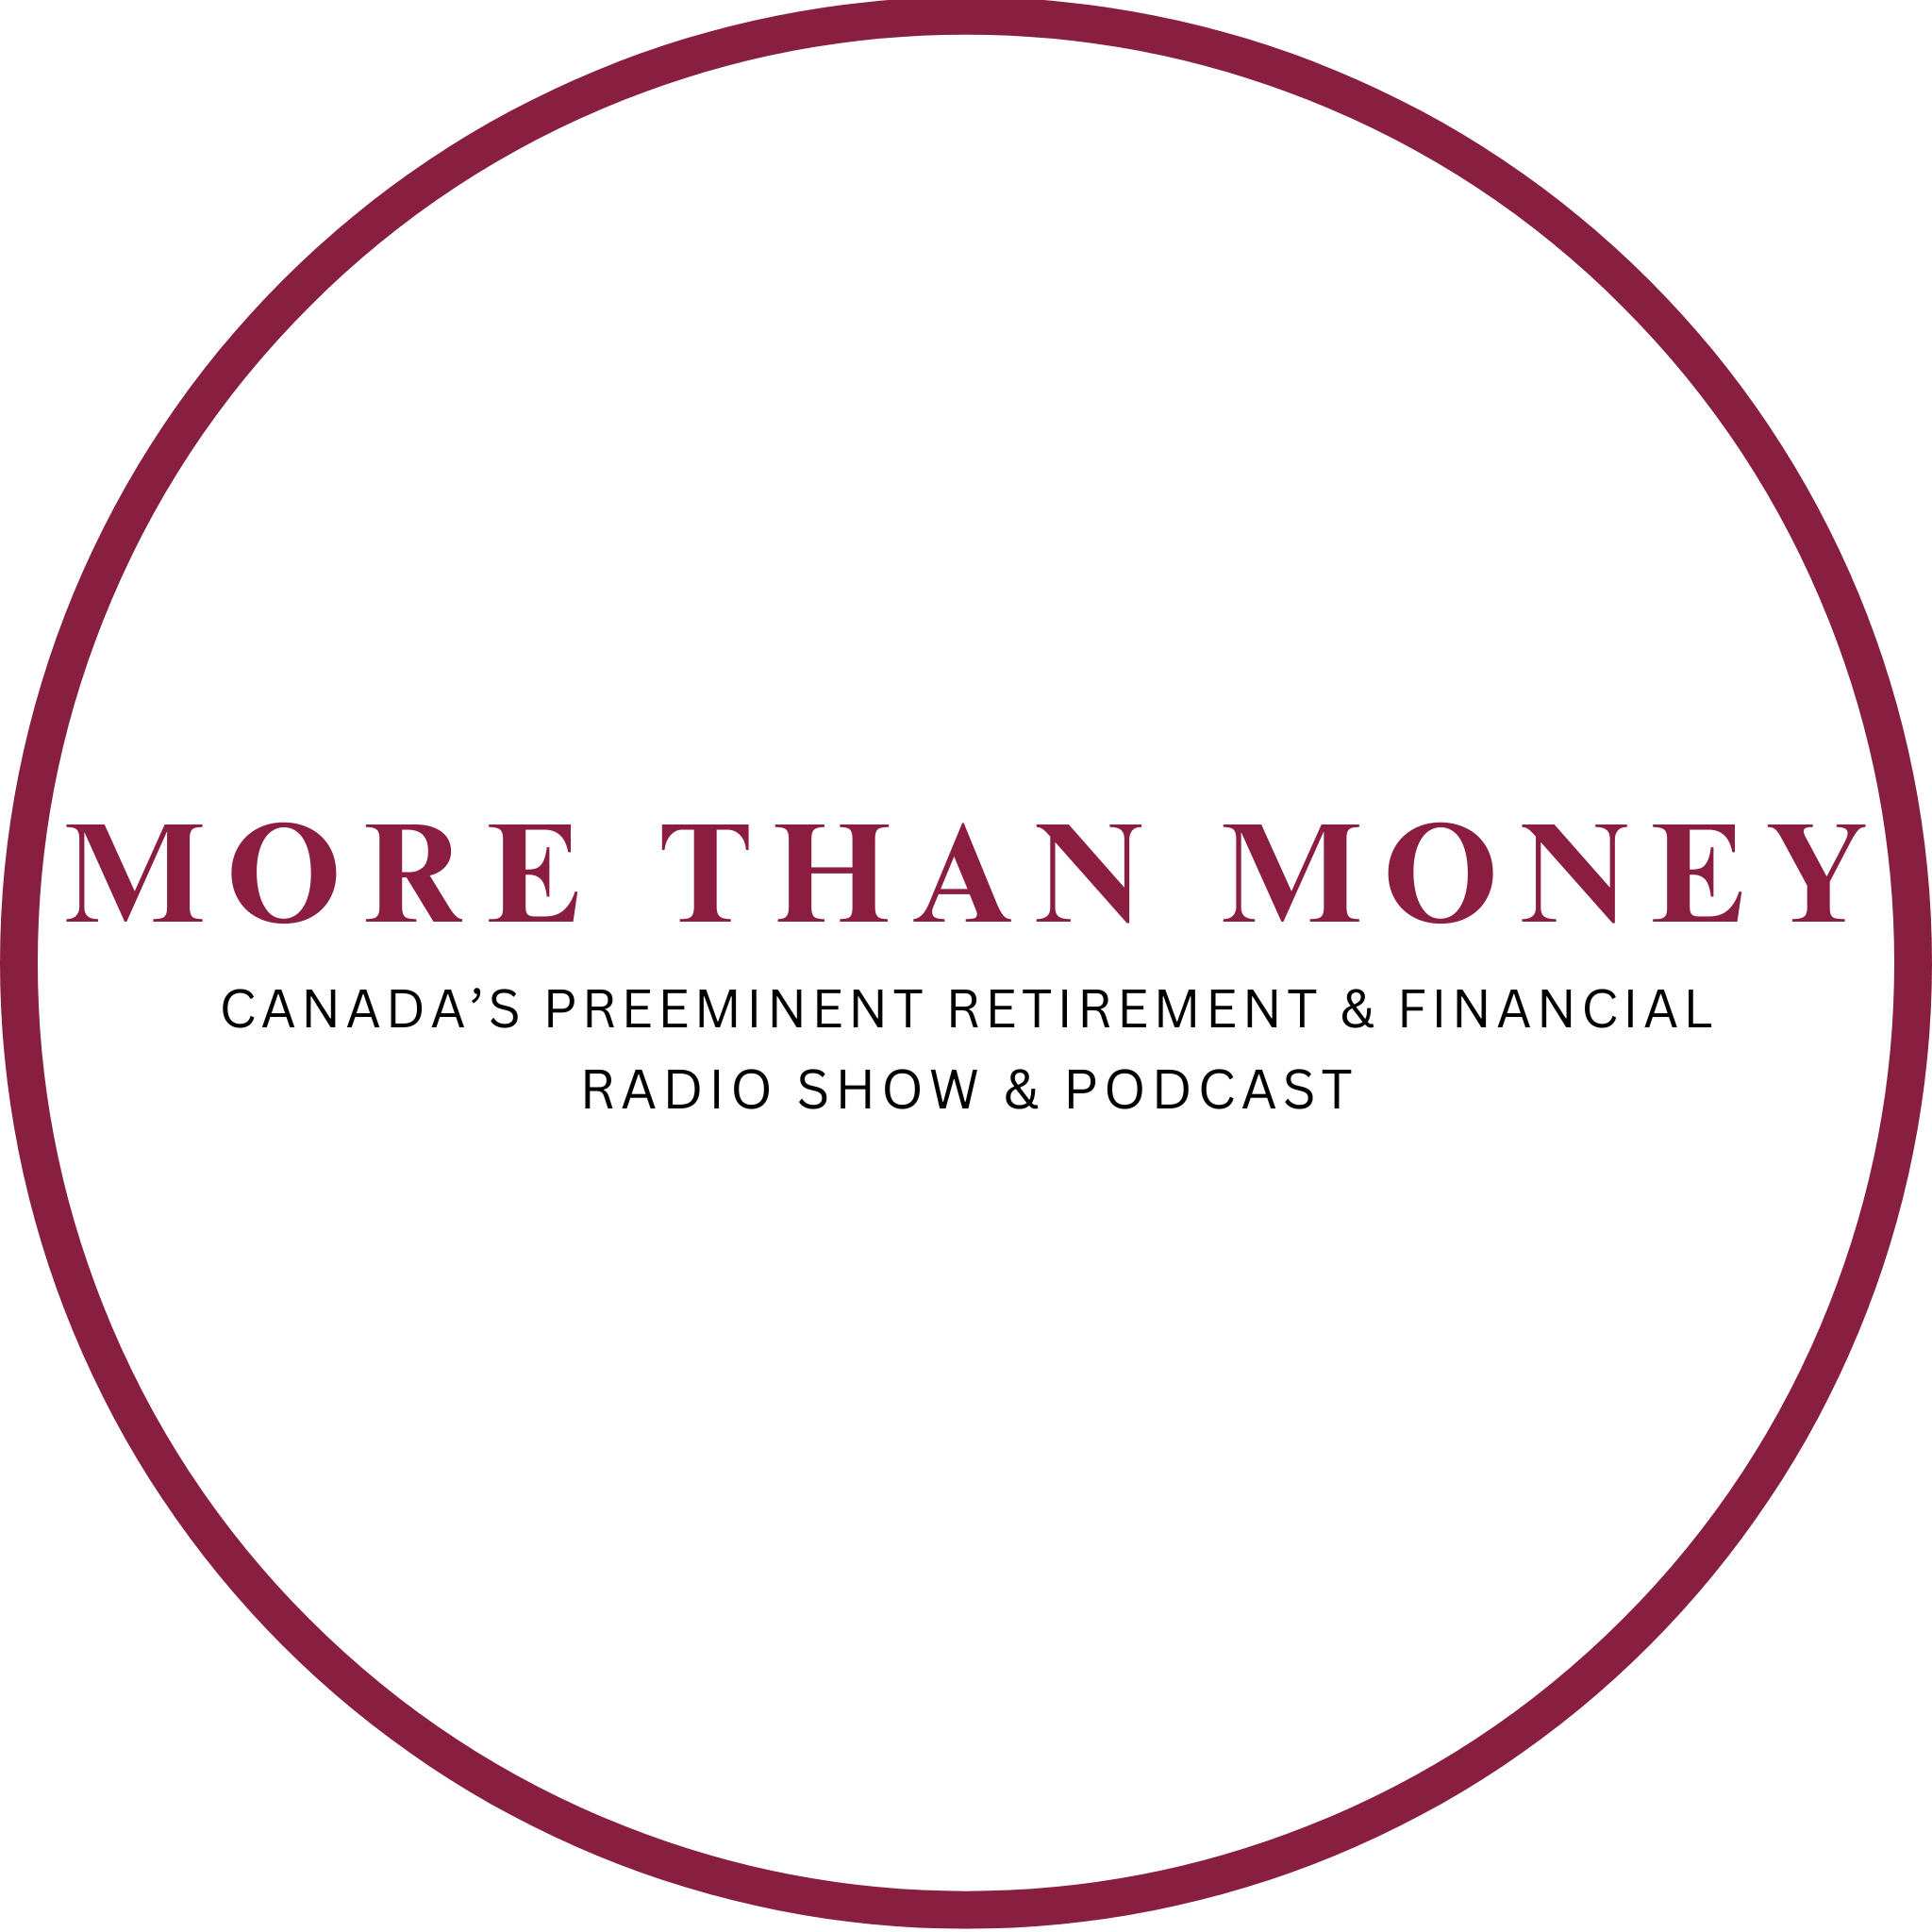 Listen to the More Than Money Radio Show